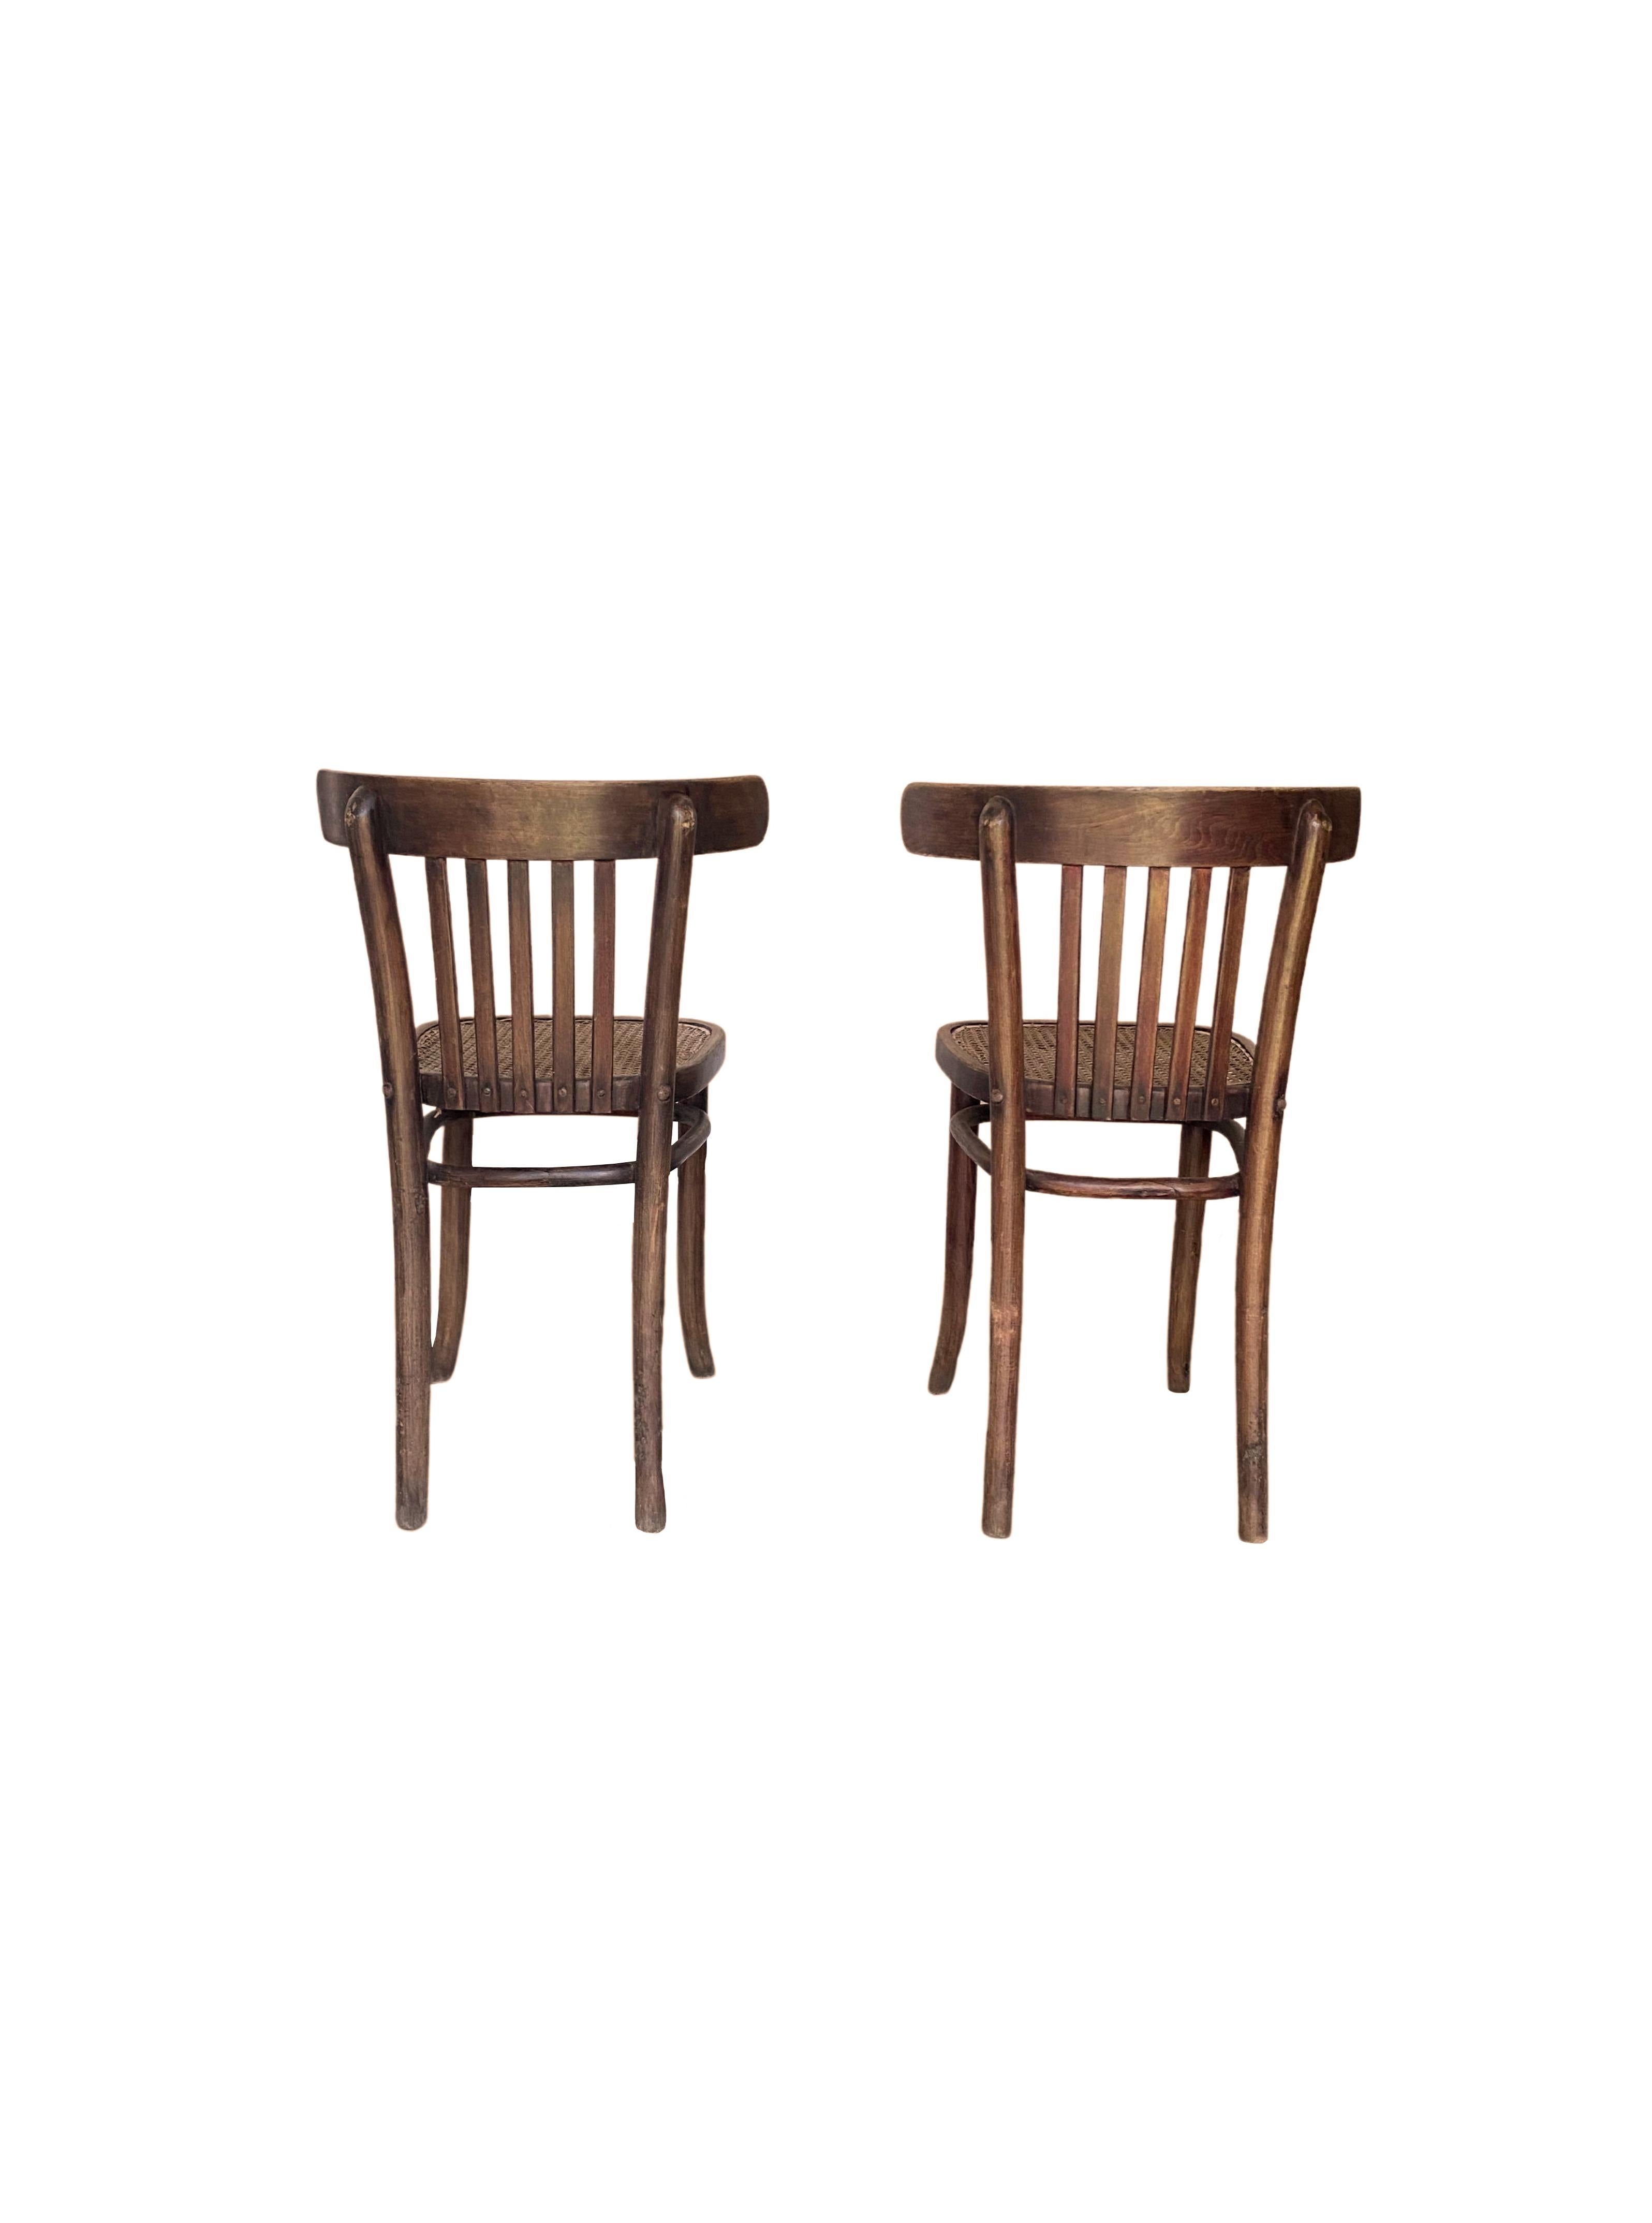 Pair of Dutch Colonial Plantation Chairs from Java, Indonesia c. 1900 In Good Condition For Sale In Jimbaran, Bali